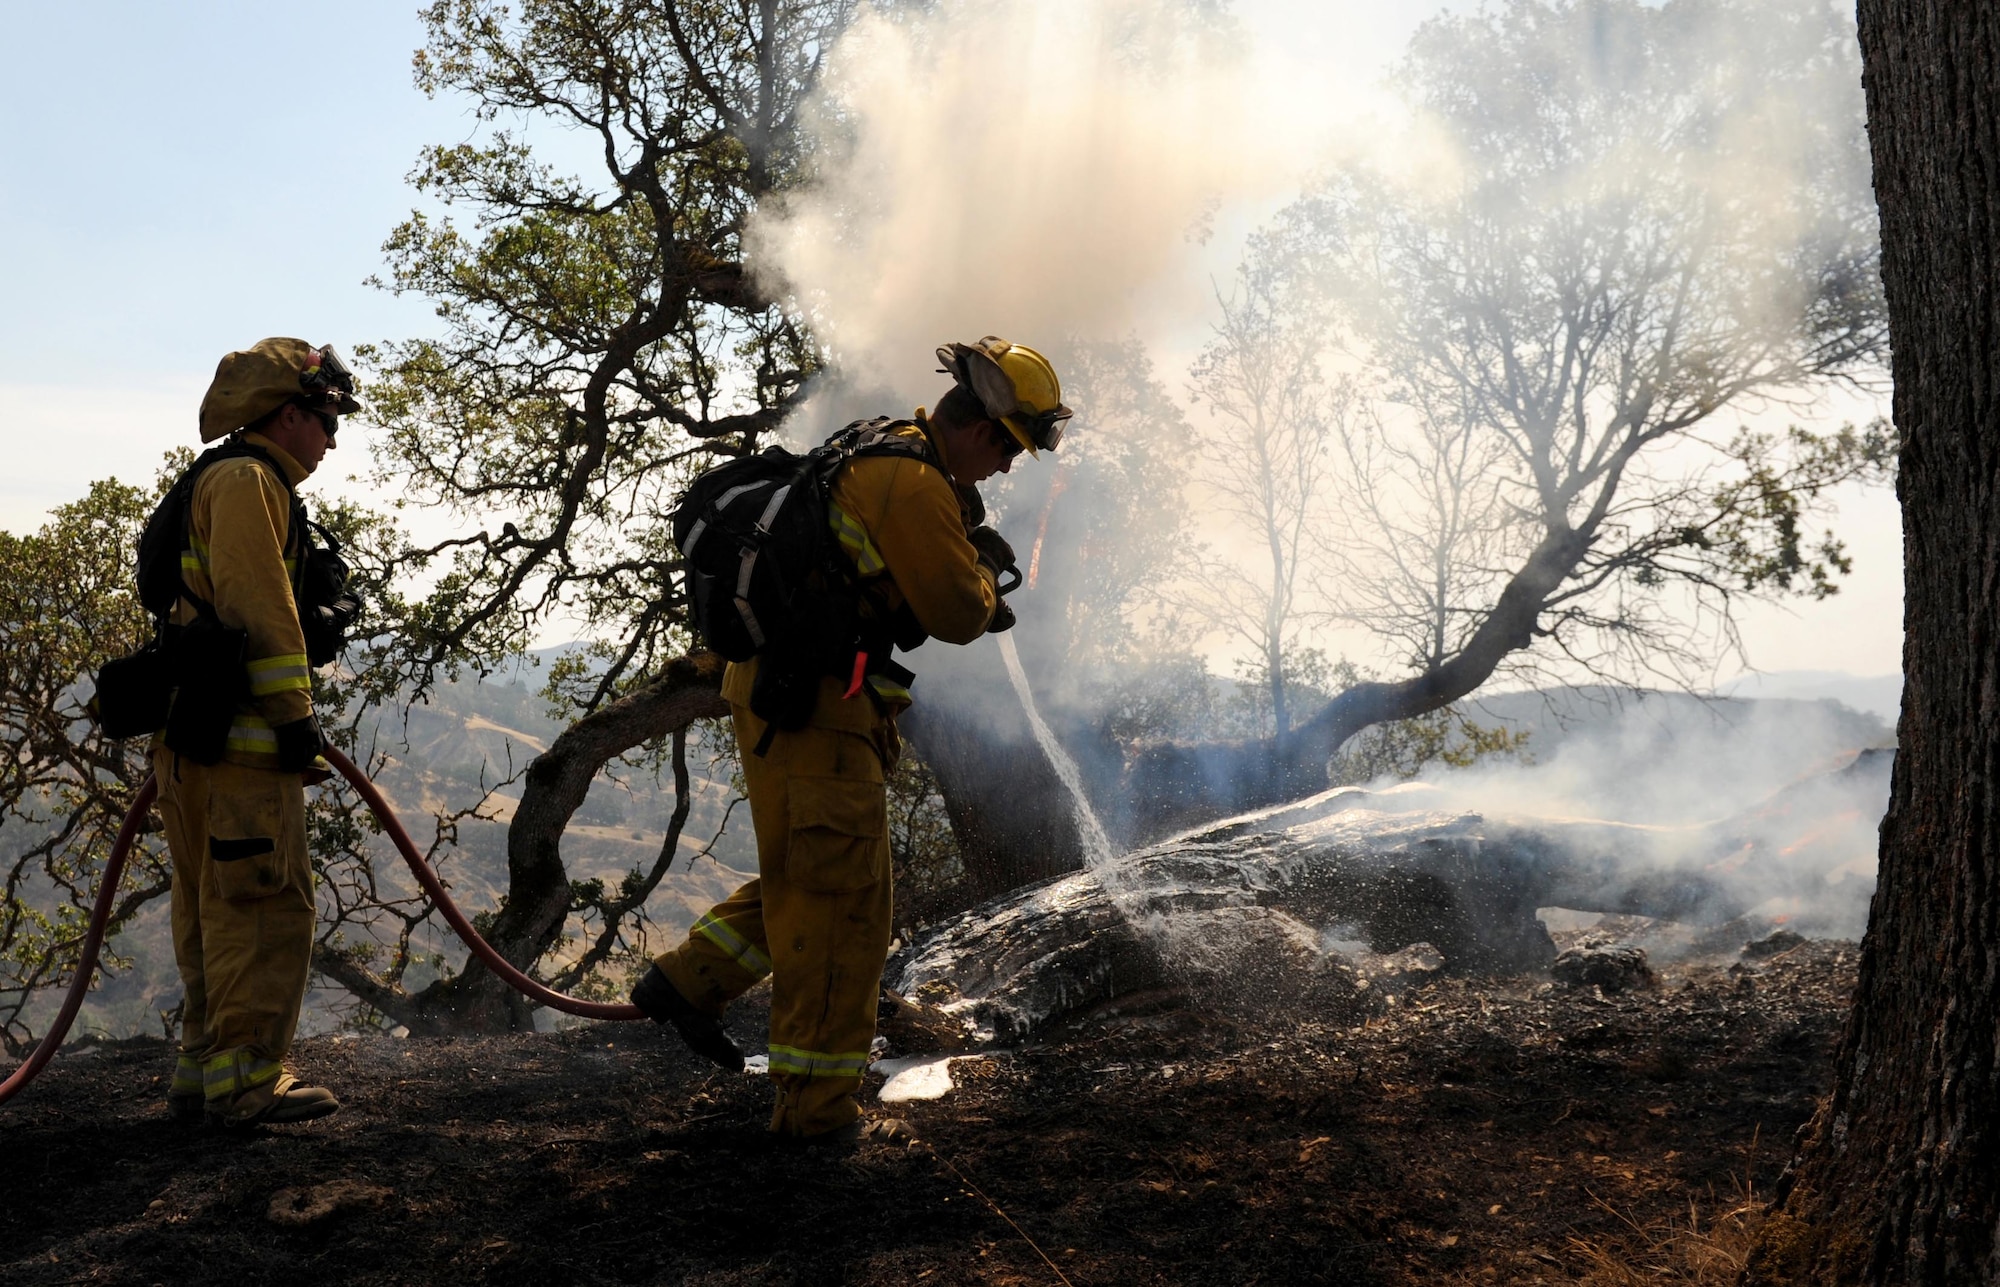 Will Hock, a 9th Civil Engineer Squadron fire captain, assists Justin Devorss, a Linda Fire Protection District engineer, with extinguishing a fire Aug. 6, 2015, near Clearlake, Calif. The fire is associated with the Rocky Fire that has consumed nearly 70,000 acres in Northern California. (U.S. Air Force photo/Airman Preston L. Cherry)